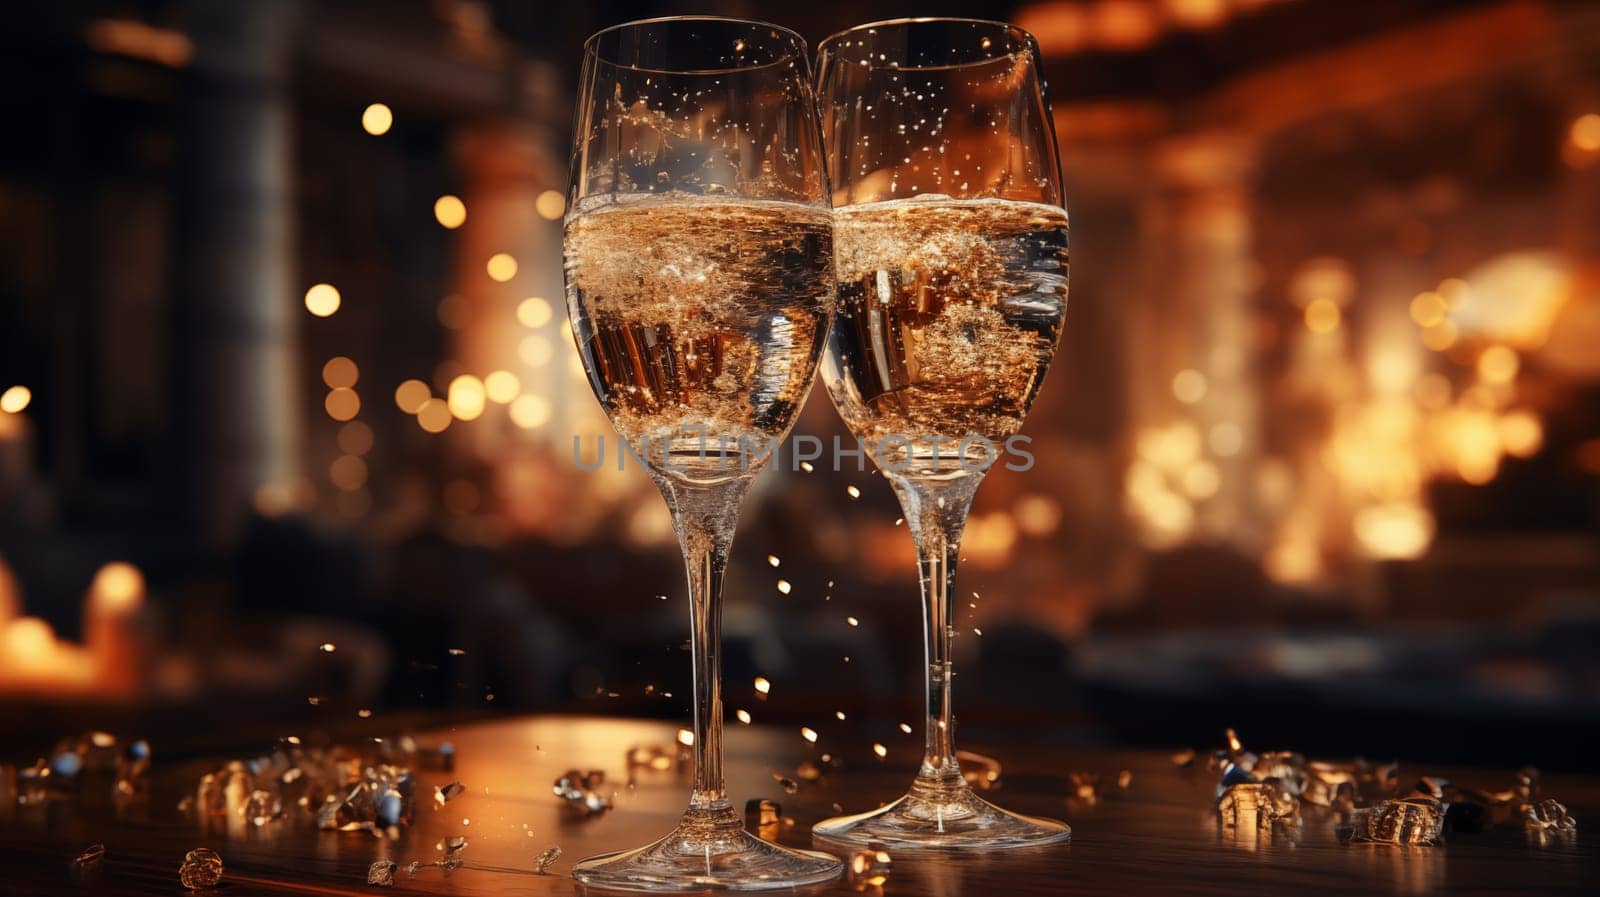 Two glasses of champagne with particles of gold stand on the table with pieces of ice, surrounded by golden bokeh lights.